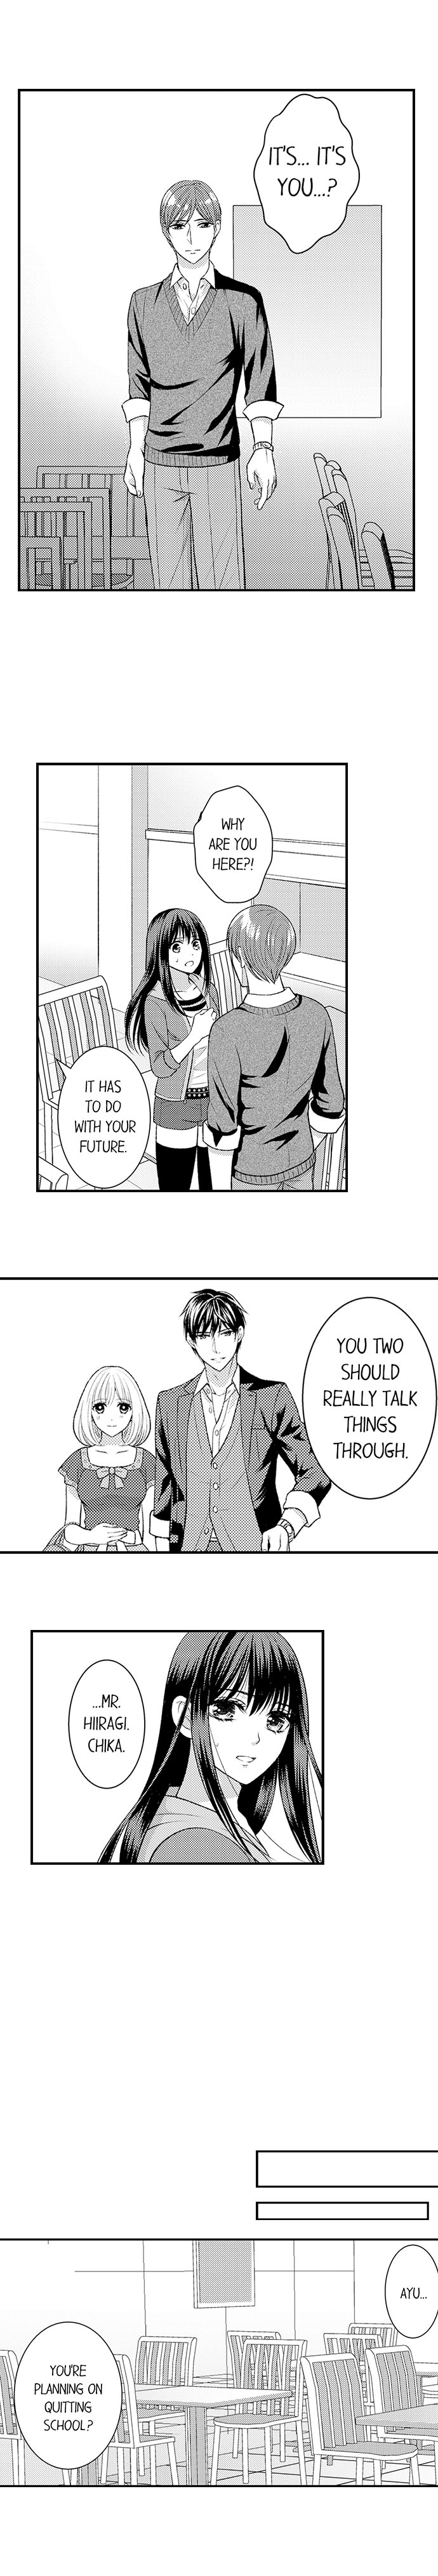 He Took My Adult Toy - "I'll Teach You How to Use It" Ch.20